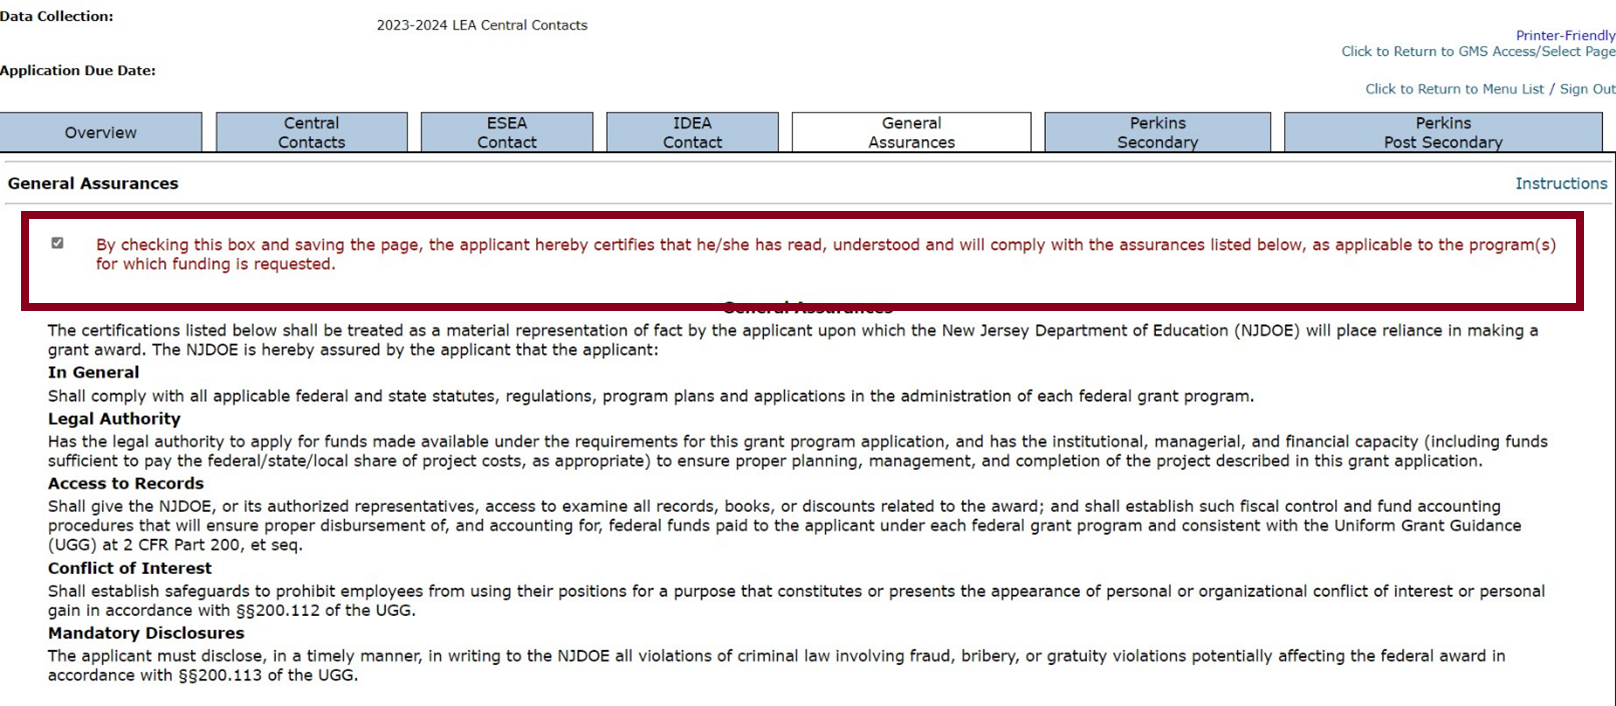 Screenshot: General assurances with checkbox outlined. Sections shown include: legal authority, access to reacords, conflict of interest, and mandatory disclosures. 